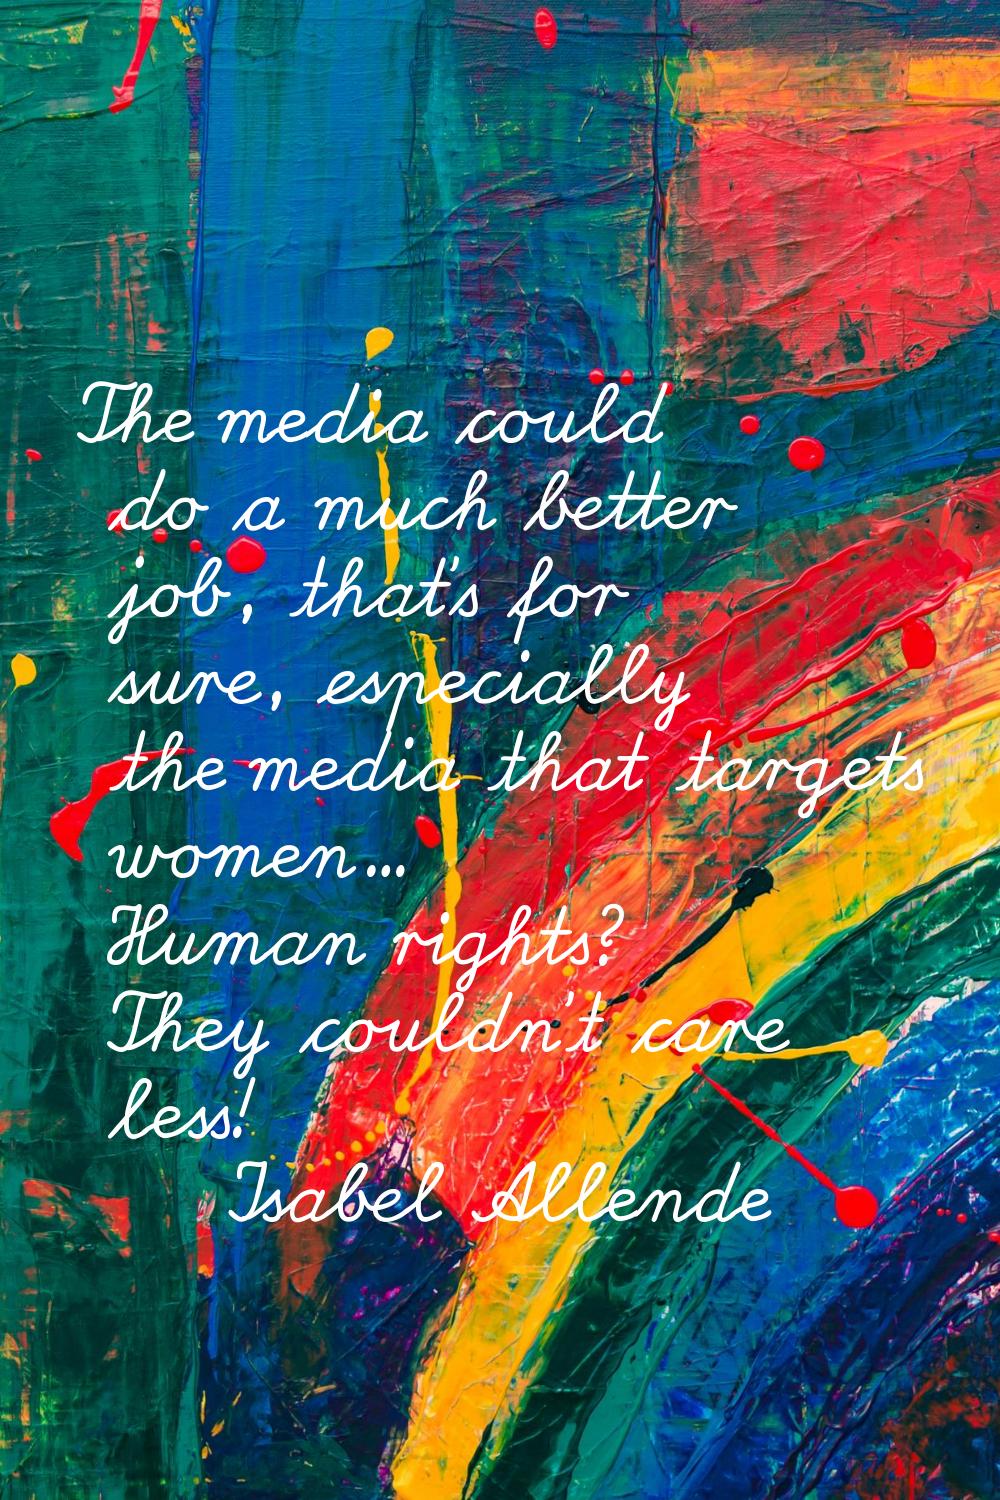 The media could do a much better job, that's for sure, especially the media that targets women... H